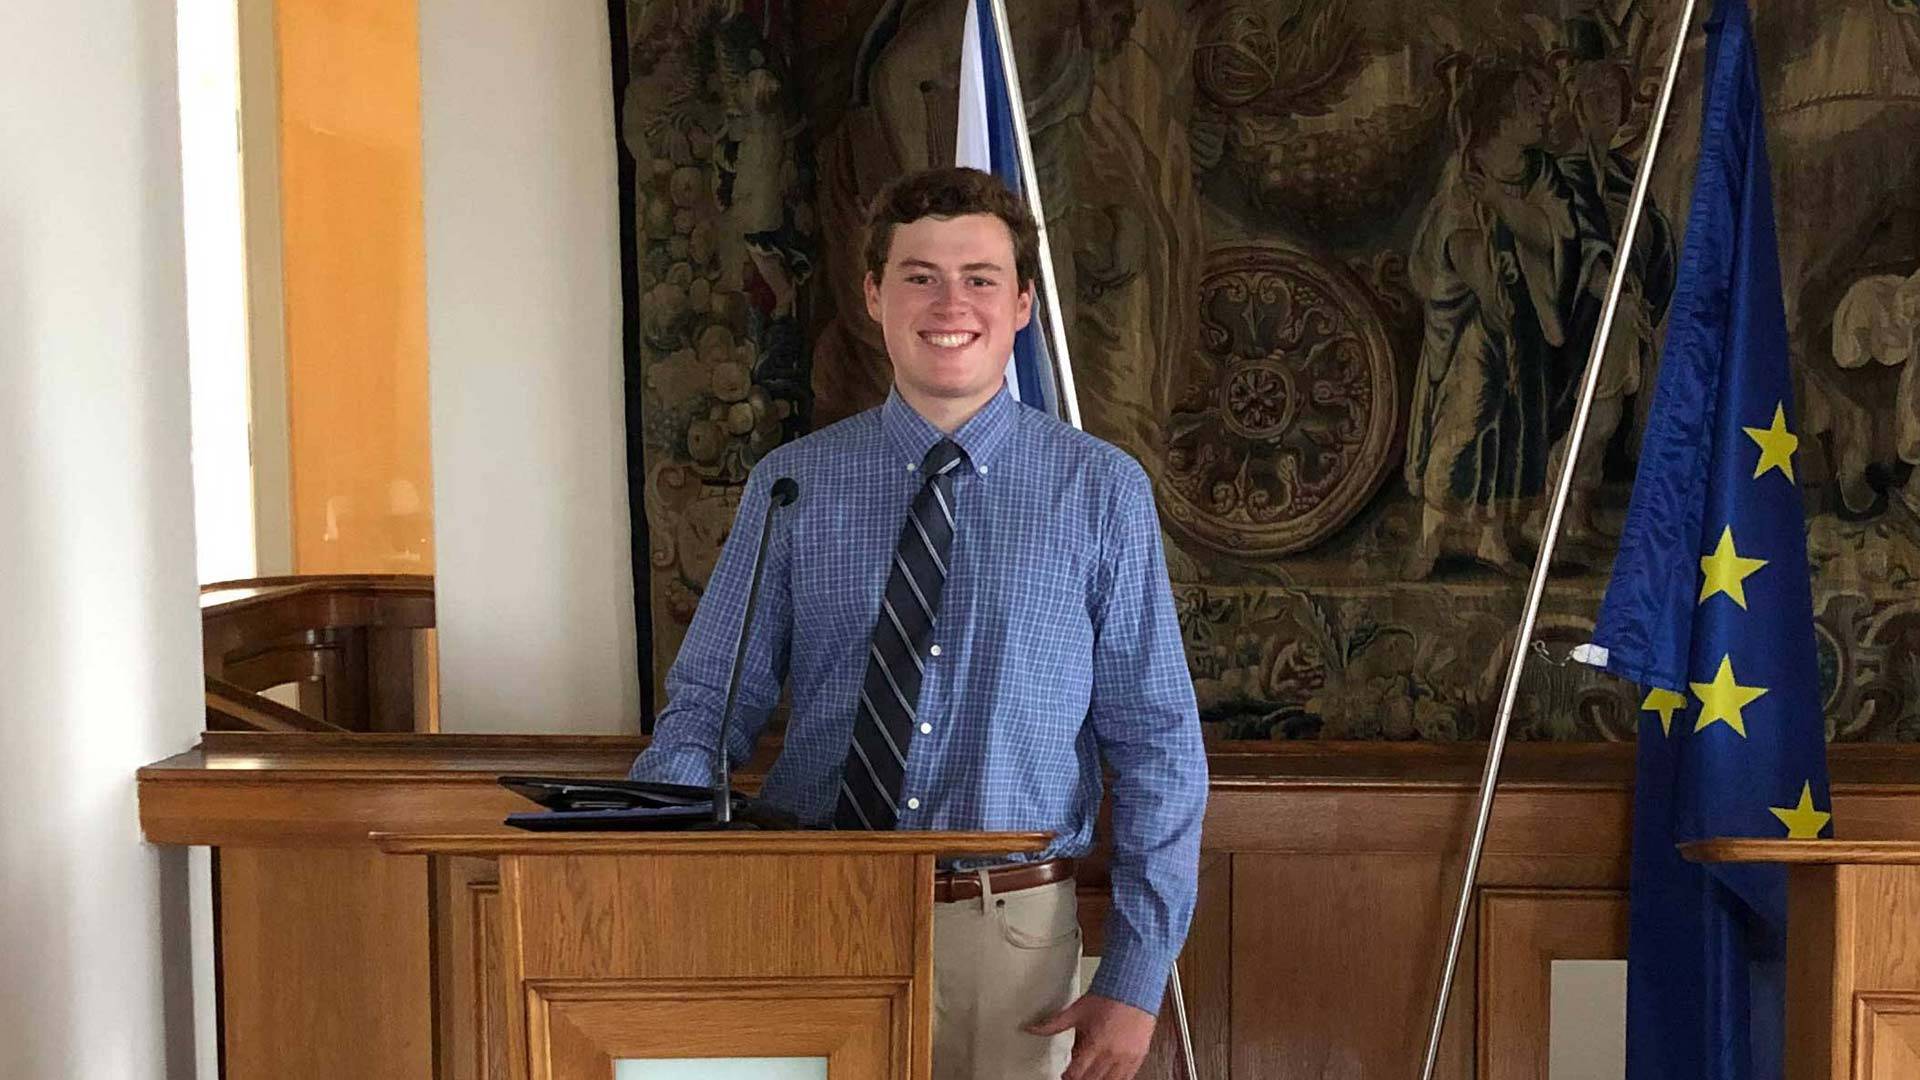 Chris Burke ’21 at a podium with the flag of the European Union behind him